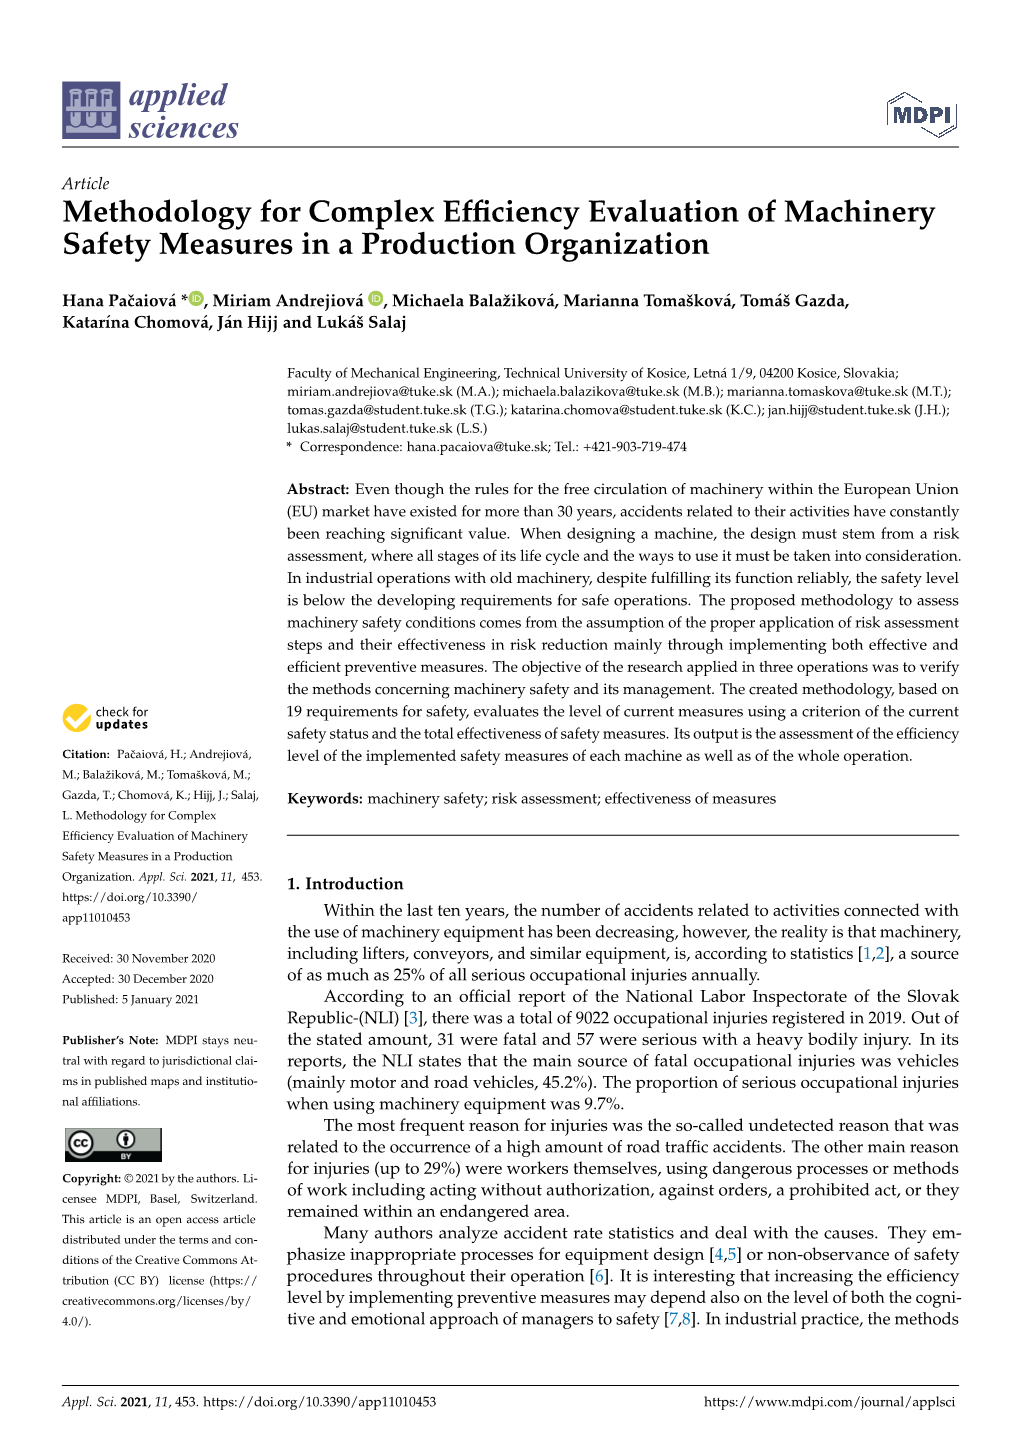 Methodology for Complex Efficiency Evaluation of Machinery Safety